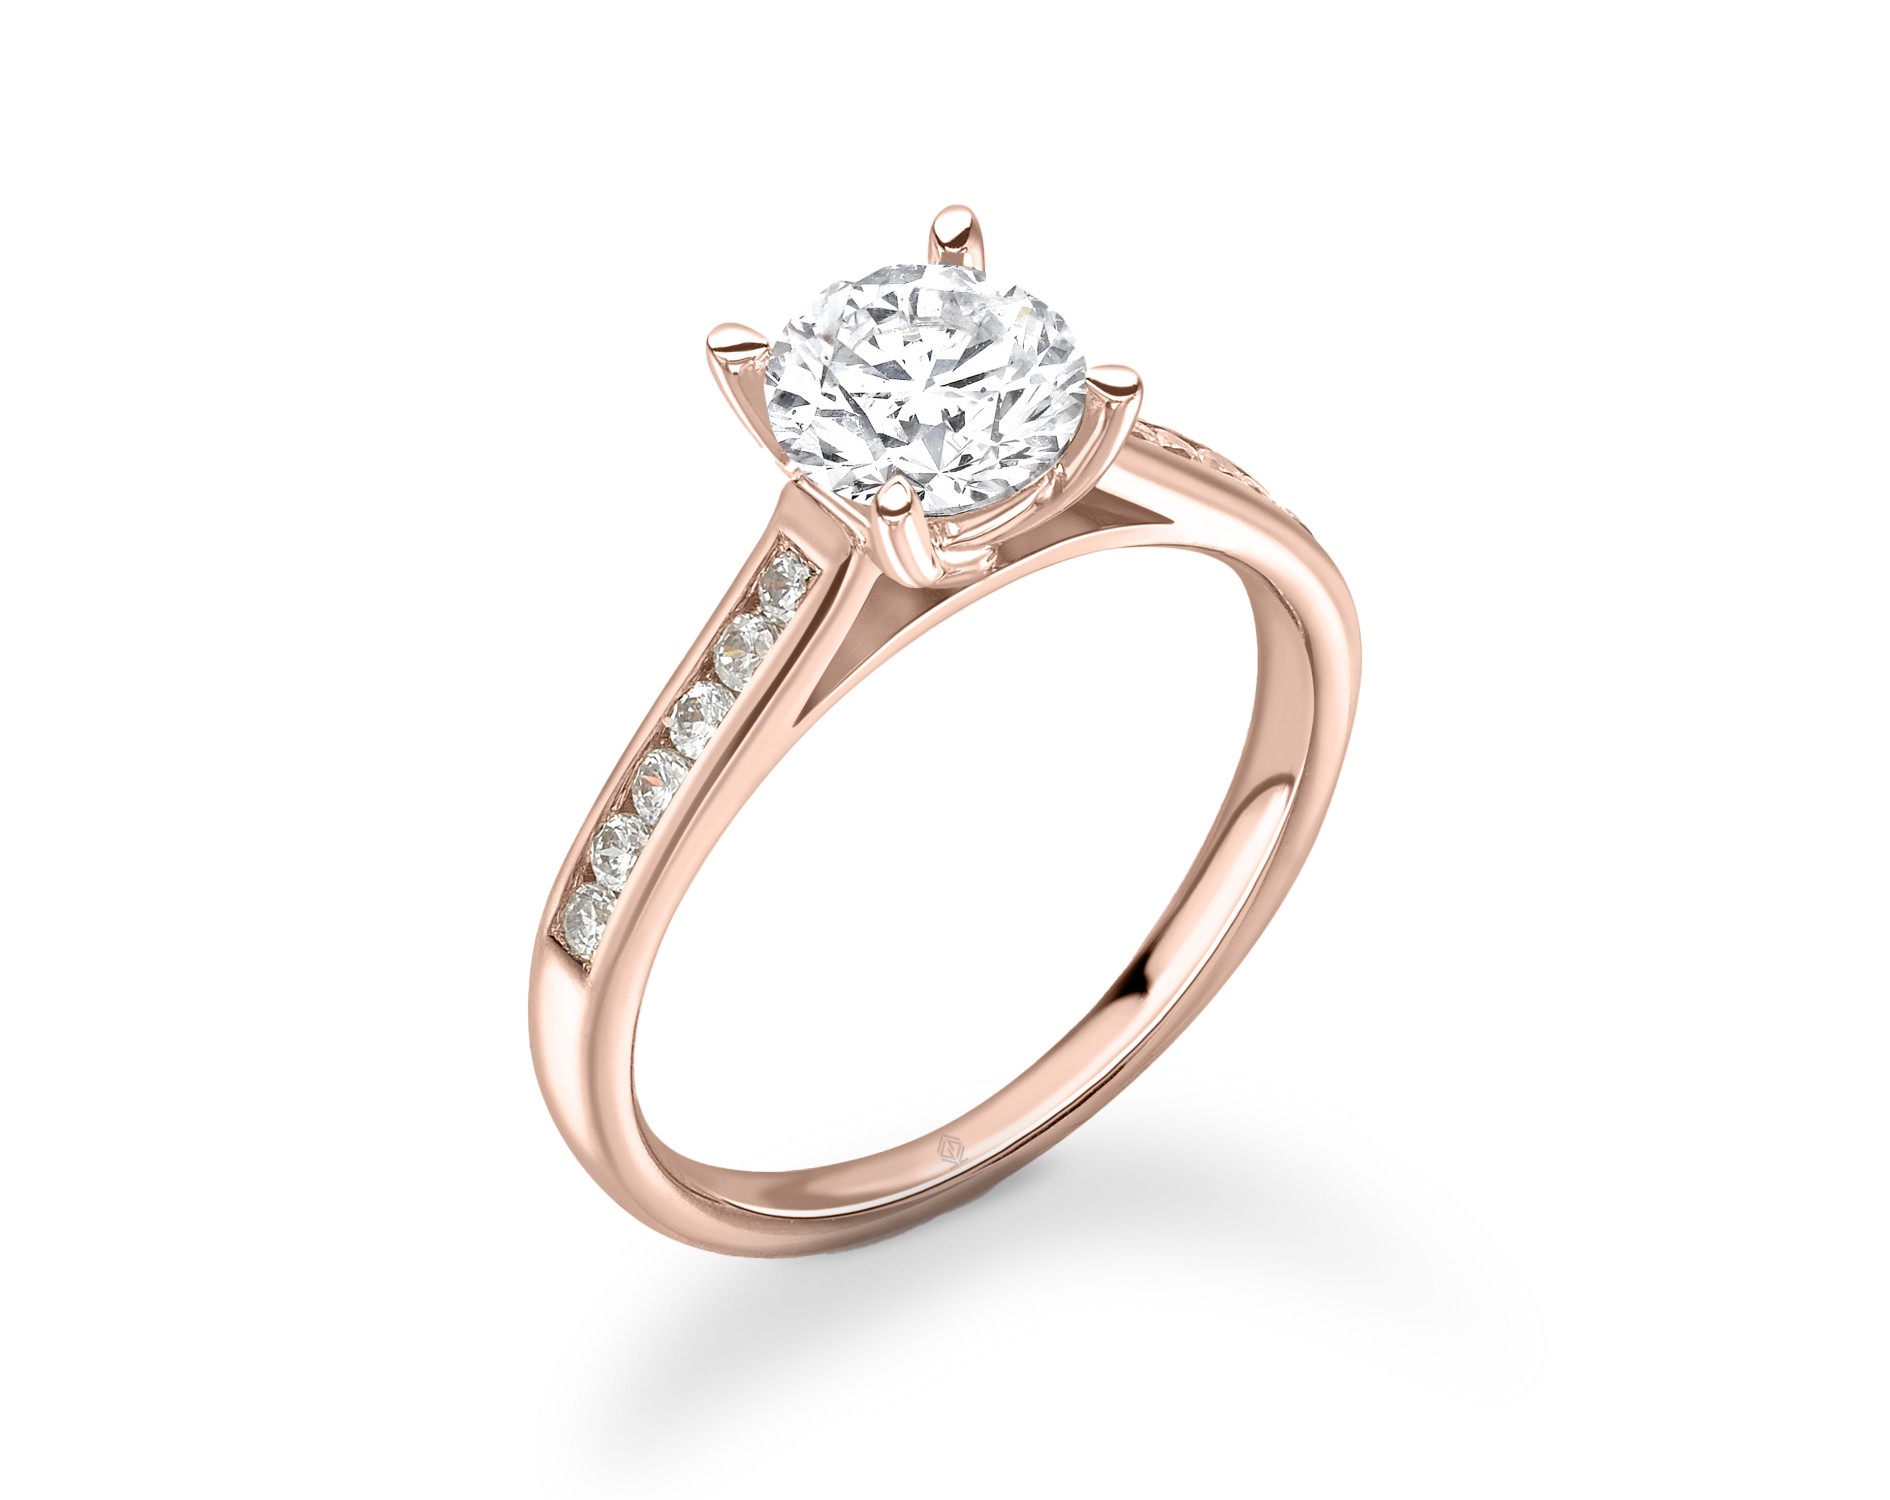 18K ROSE GOLD 4 PRONGS HEAD DIAMOND ENGAGEMENT RING WITH SIDE STONES CHANNEL SET